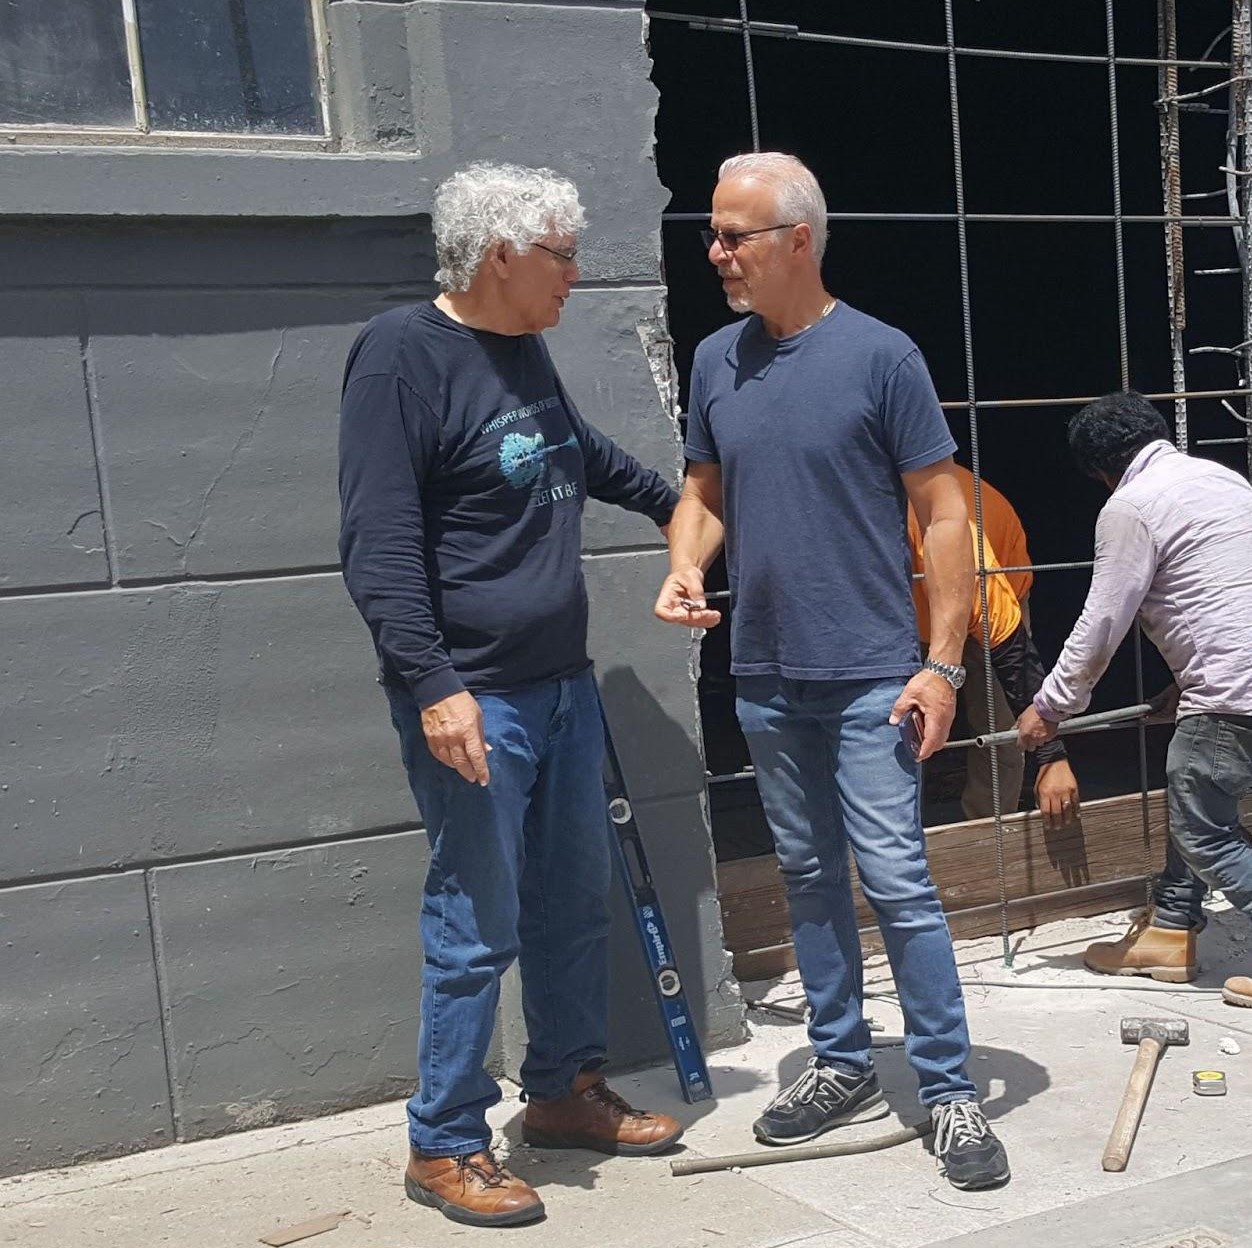 Martin Espinosa consulting on a job site with a client. They are standing outside in deep discussion with two working behind them - Crystal Construction Consulting